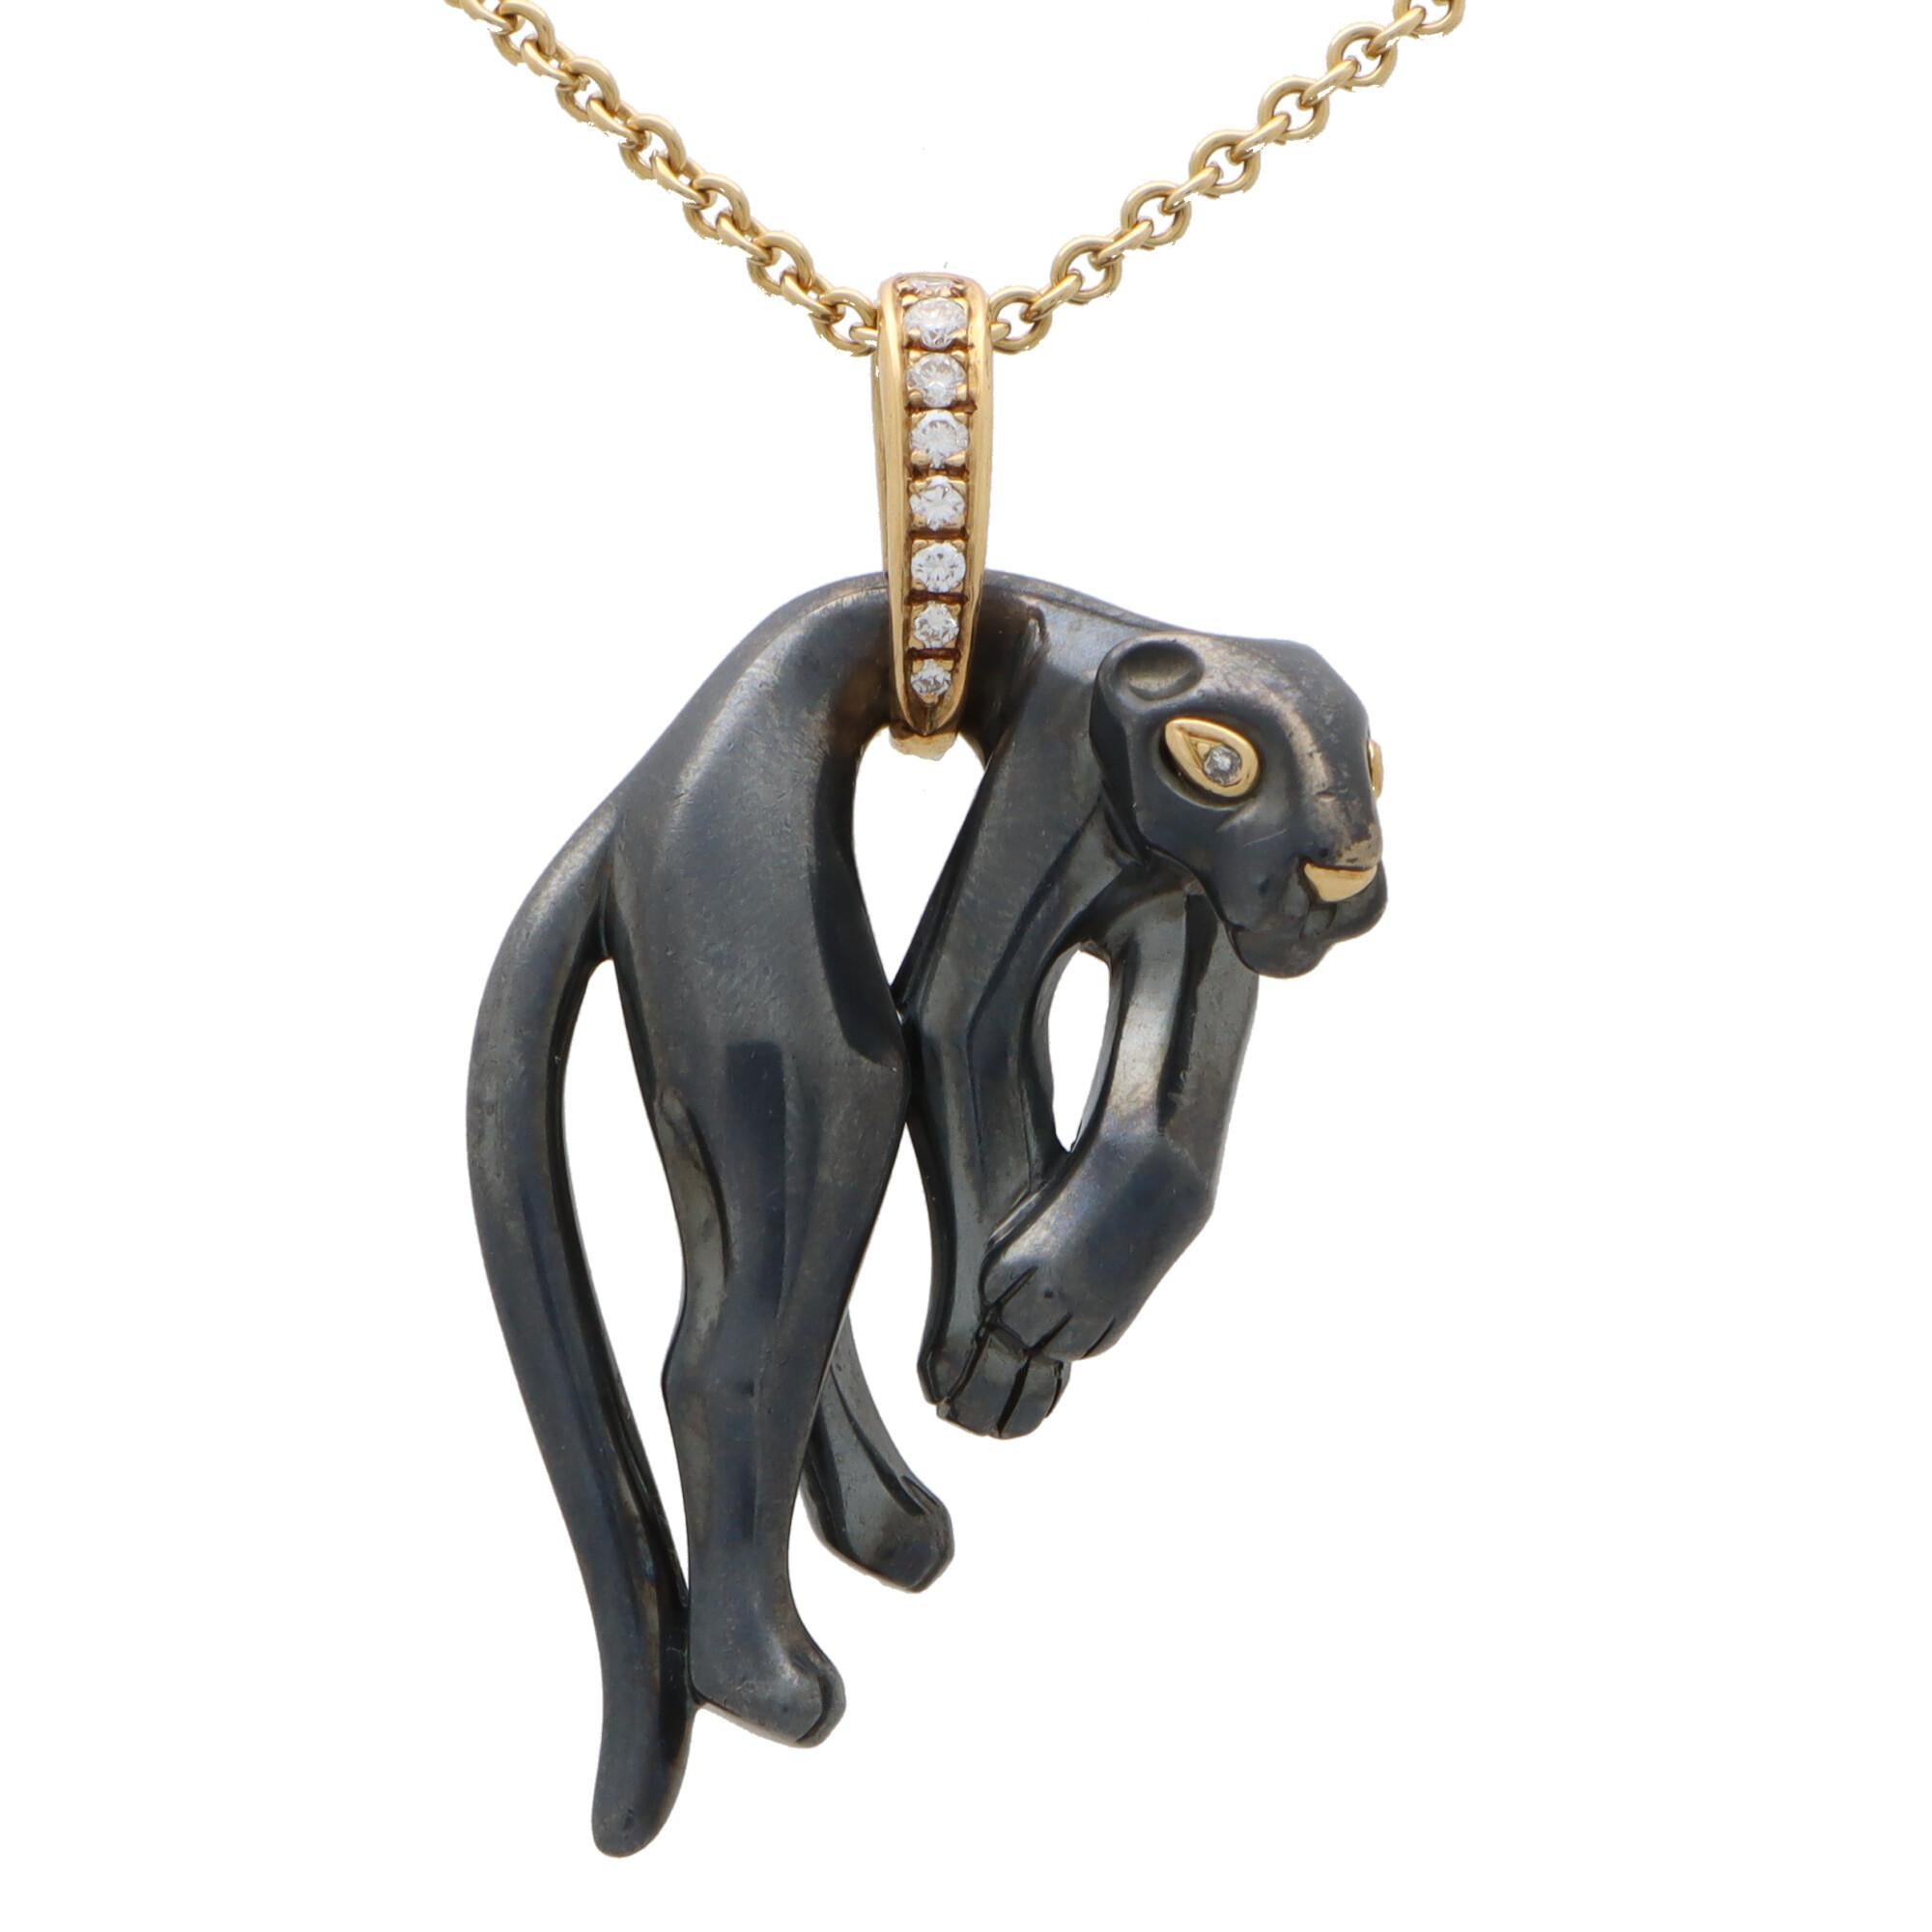 A beautiful vintage Cartier ‘Panthere De Cartier’ panther pendant set in 18k yellow gold.

The pendant depicts Cartier’s most iconic motif, the panther, made of carved hematite and yellow gold. The panther elegantly hangs from a diamond set bail and